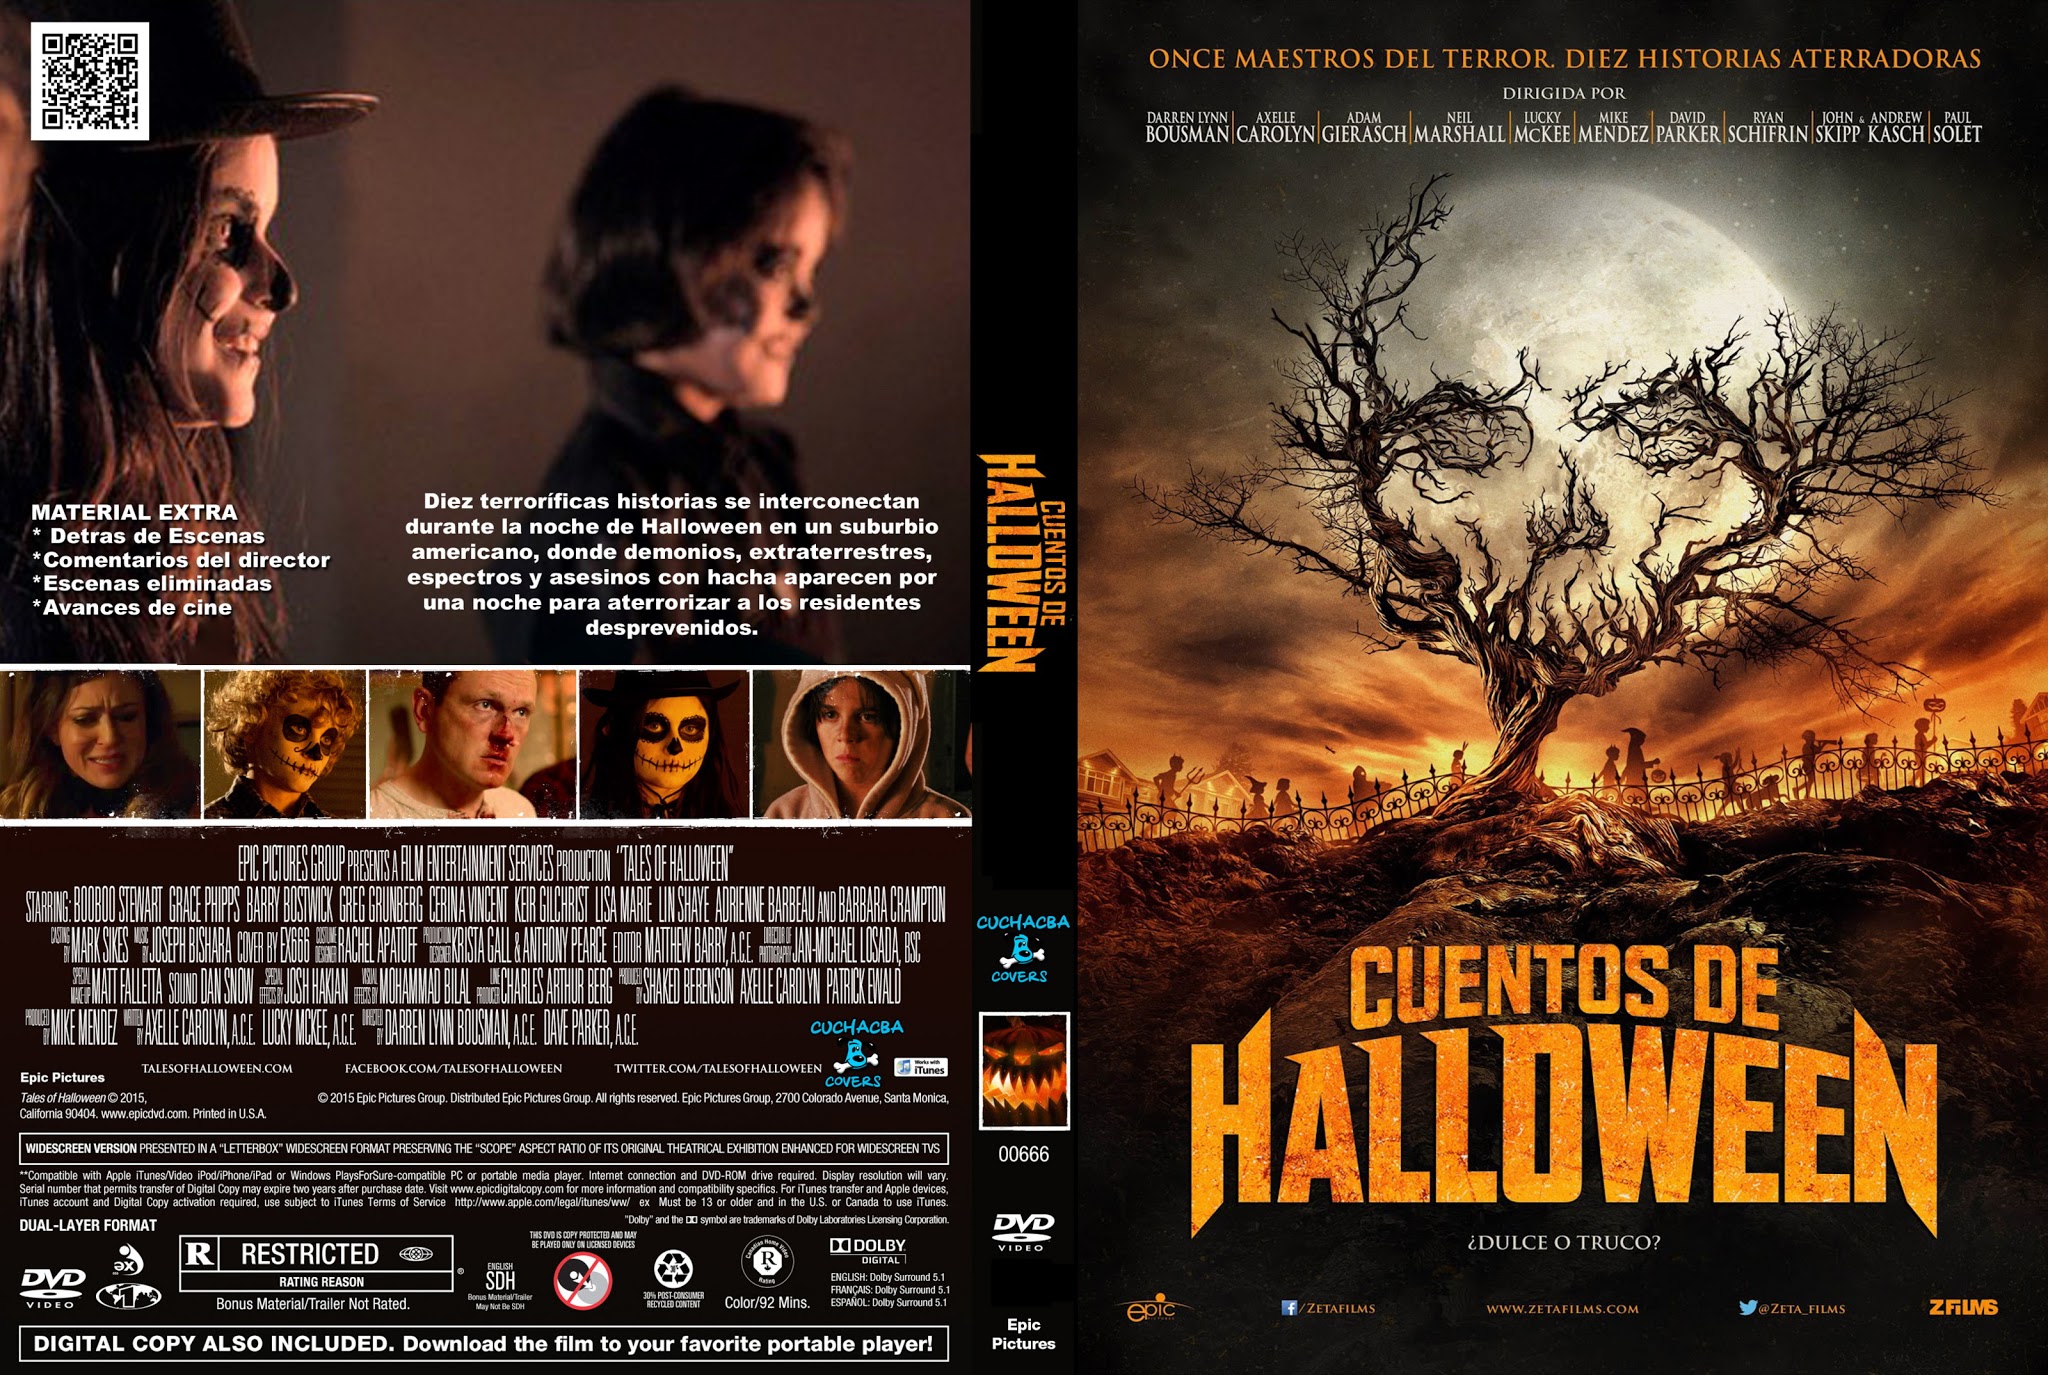 The Horrors of Halloween: TALES OF HALLOWEEN (2015) Sales Sheet, VHS, DVD  and Blu-ray covers